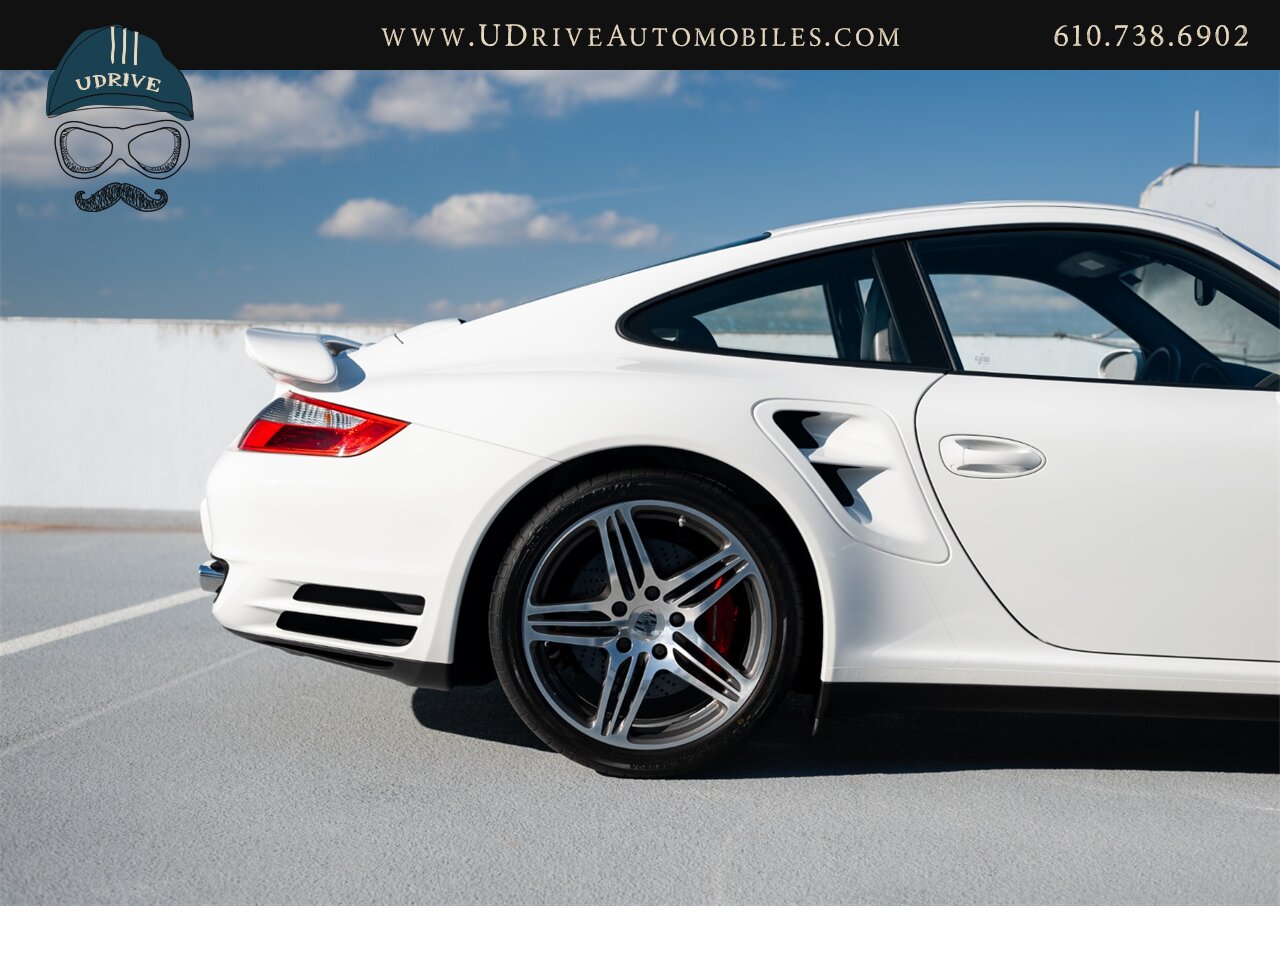 2007 Porsche 911 Turbo 642 Miles 1 Owner Carrara White 997  Sport Chrono Adaptive Sport Seats All Documentation from New - Photo 14 - West Chester, PA 19382